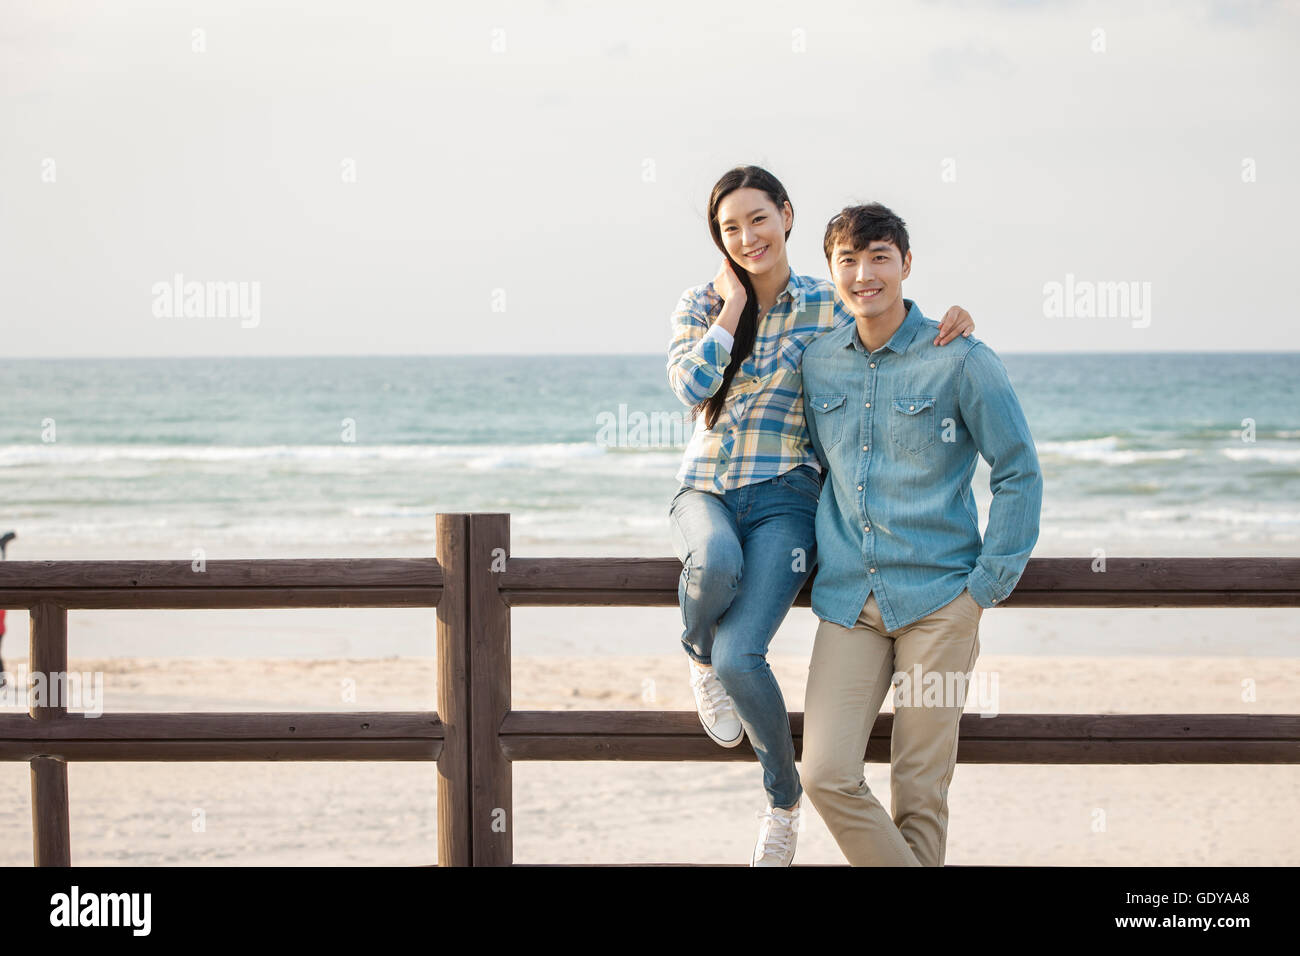 Young smiling couple posing at rail against beach Stock Photo